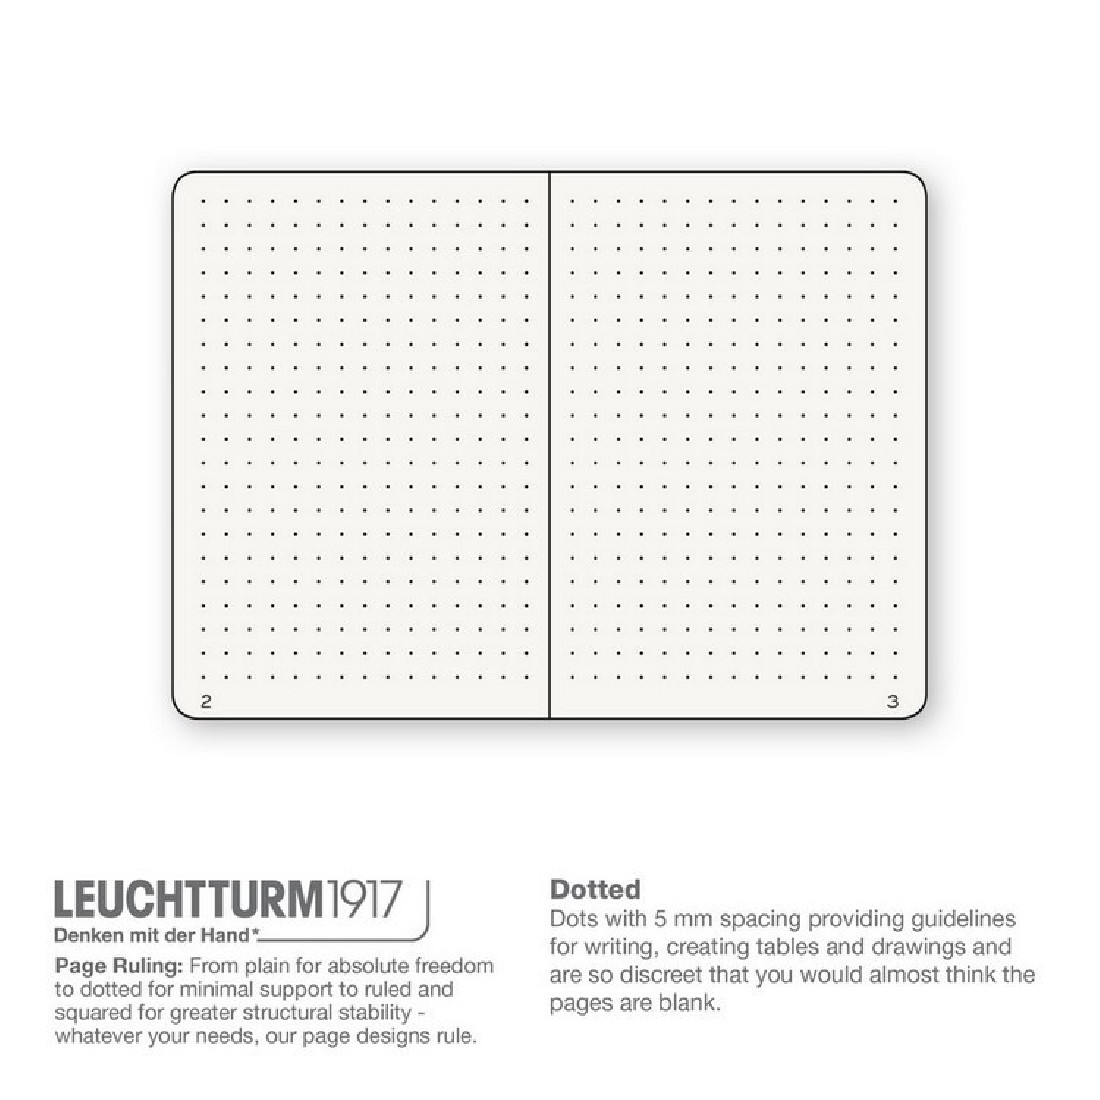 Leuchtturm 1917 Notebook A5 Port Red Dotted Soft Cover